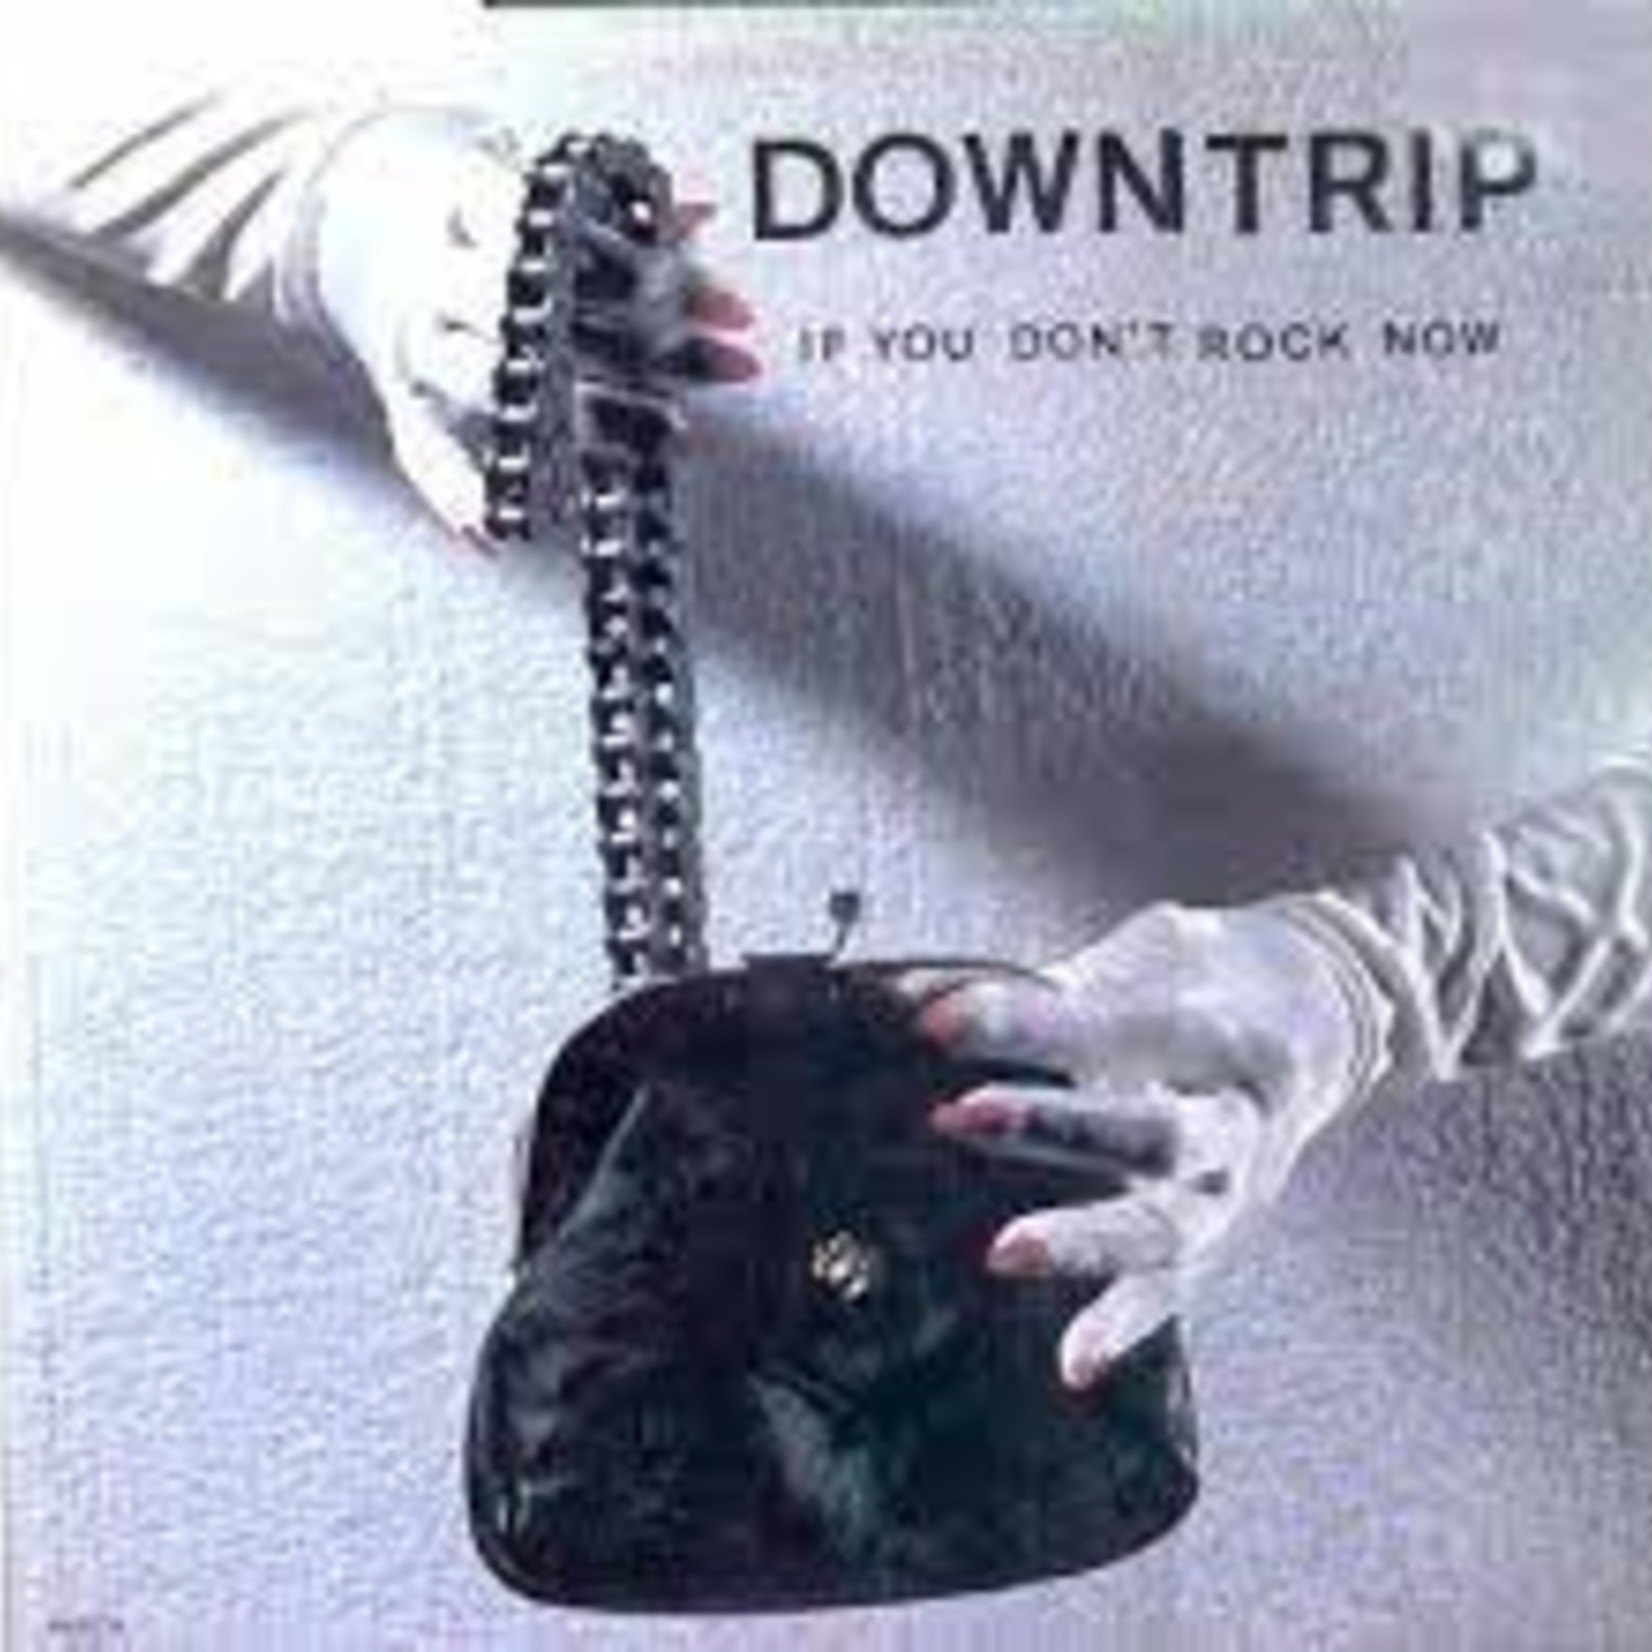 Downtrip – If You Don't Rock Now